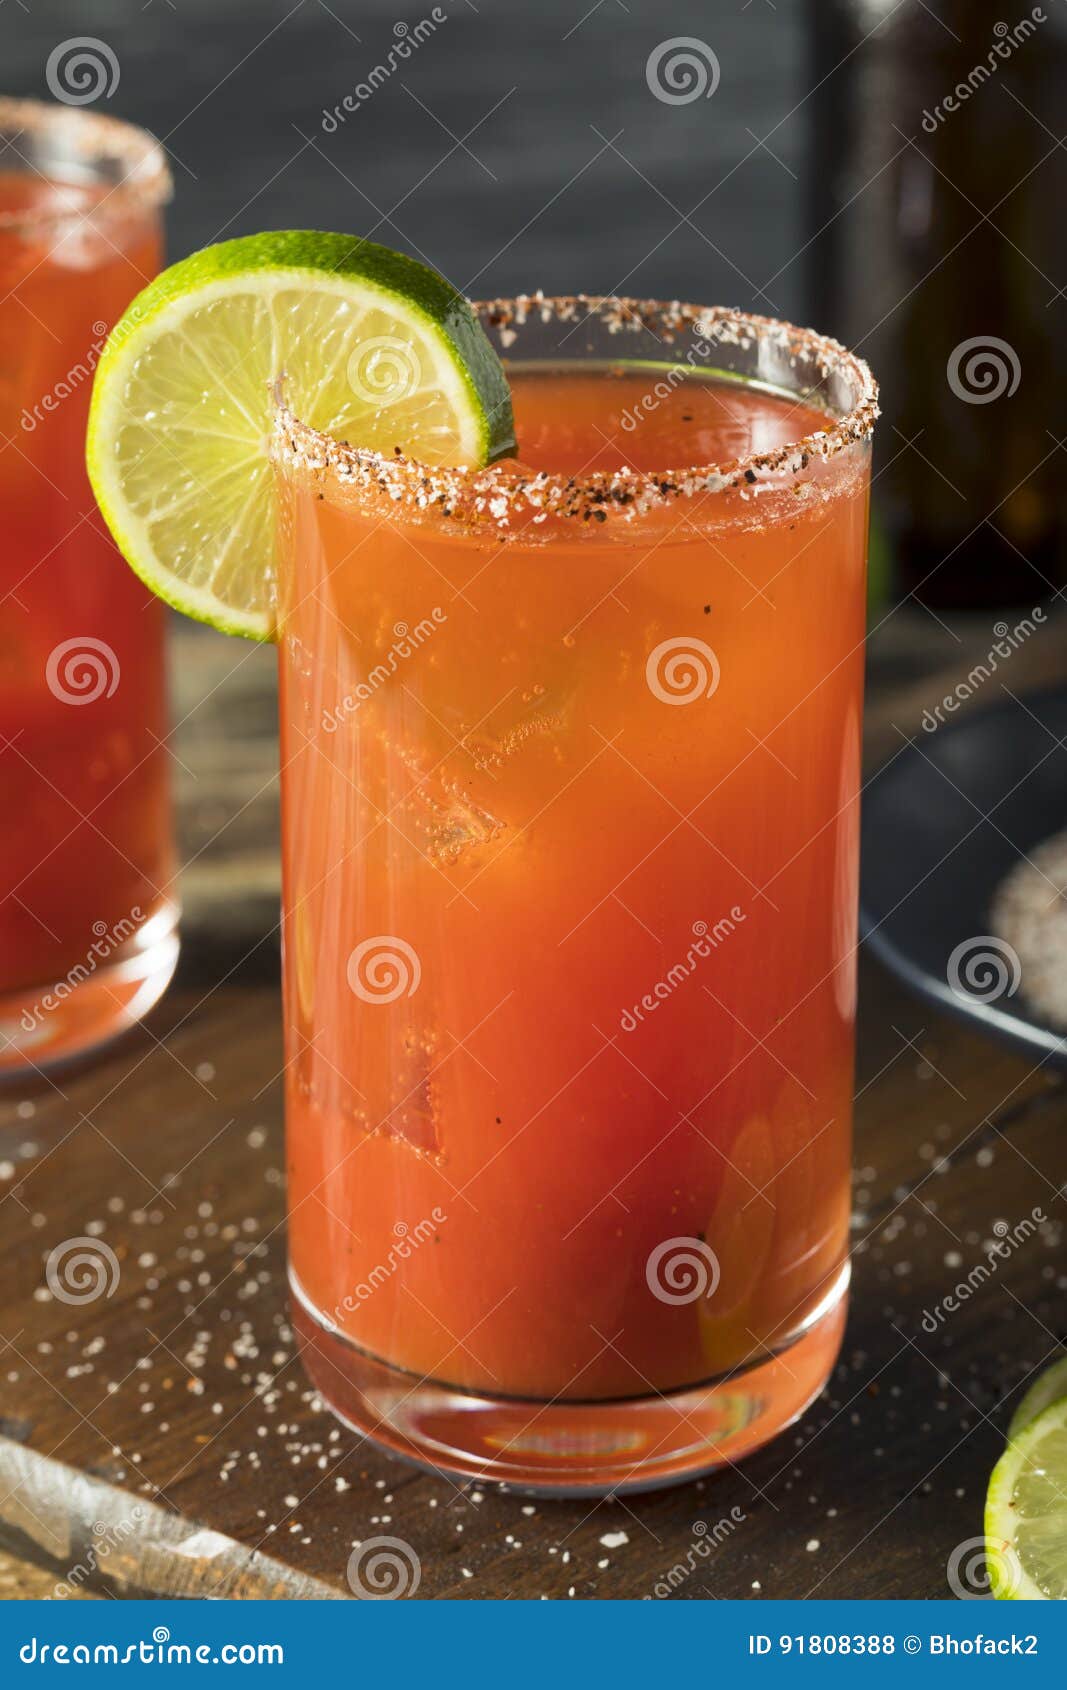 Homemade Michelada with Beer and Tomato Juice Stock Photo - Image of ...